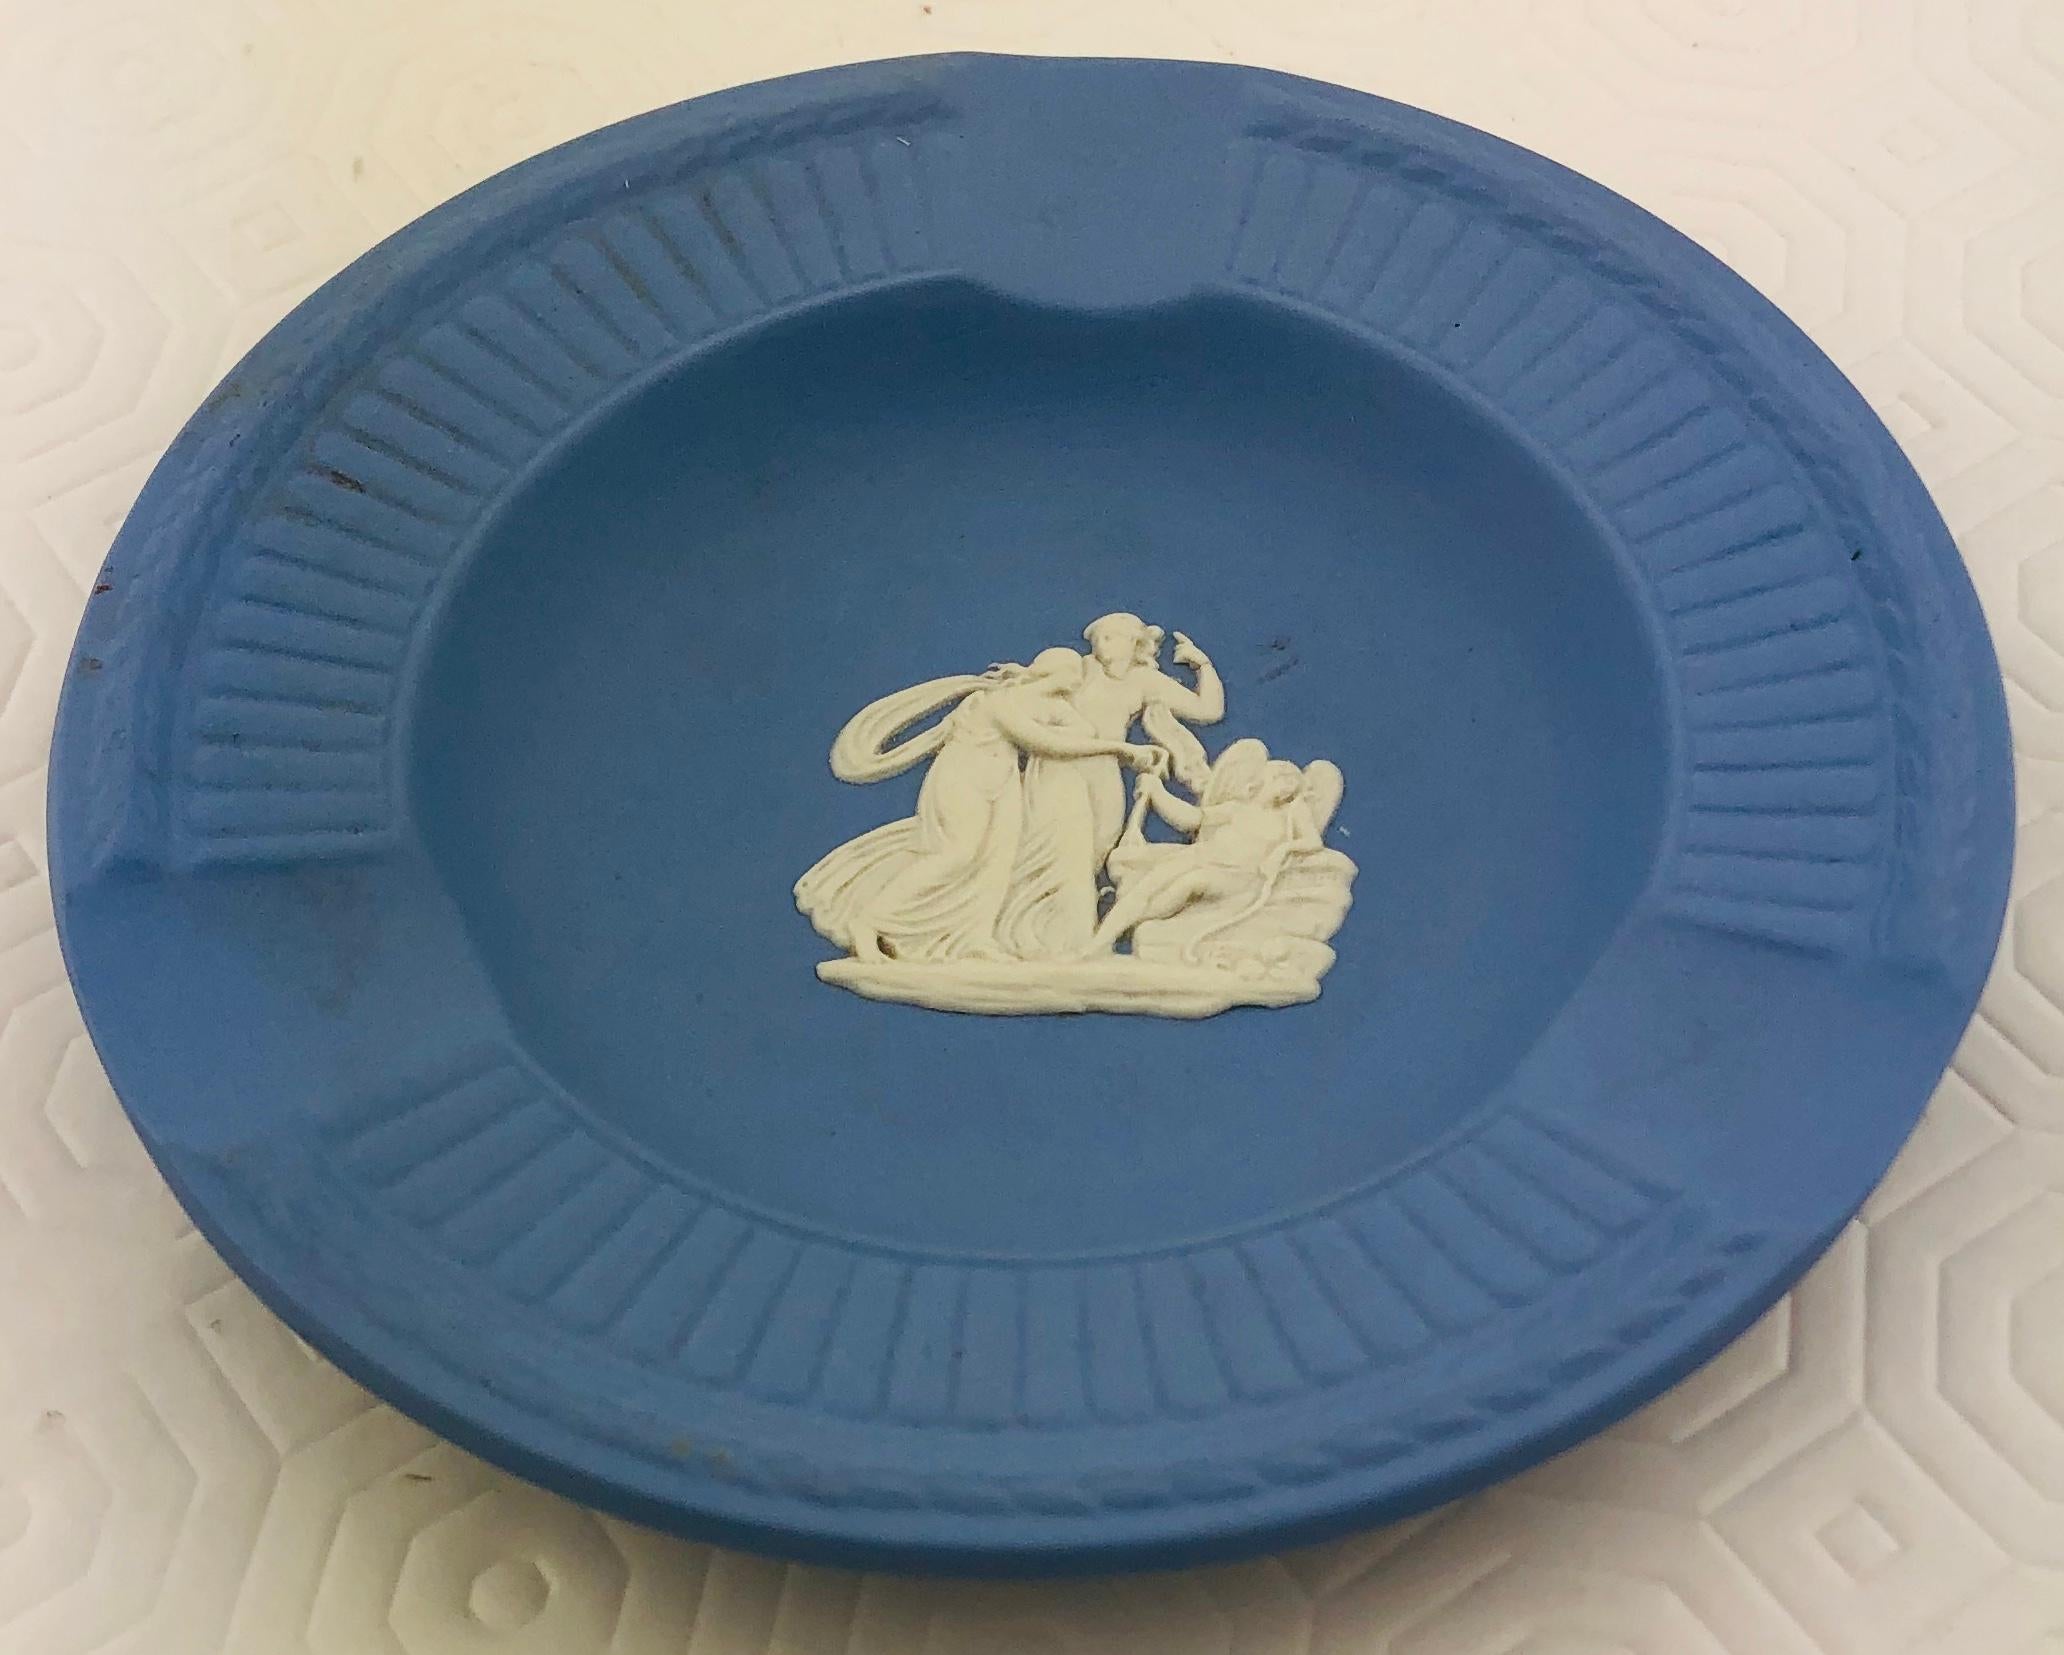 Beautiful English Wedgwood Jasperware ashtray or key holder/vide poche in “Wedgwood Blue” features a repeating motif of white, high relief acanthus leaves alternating with floral sprigs and a floral banded border.

Jasperware or jasper ware is a